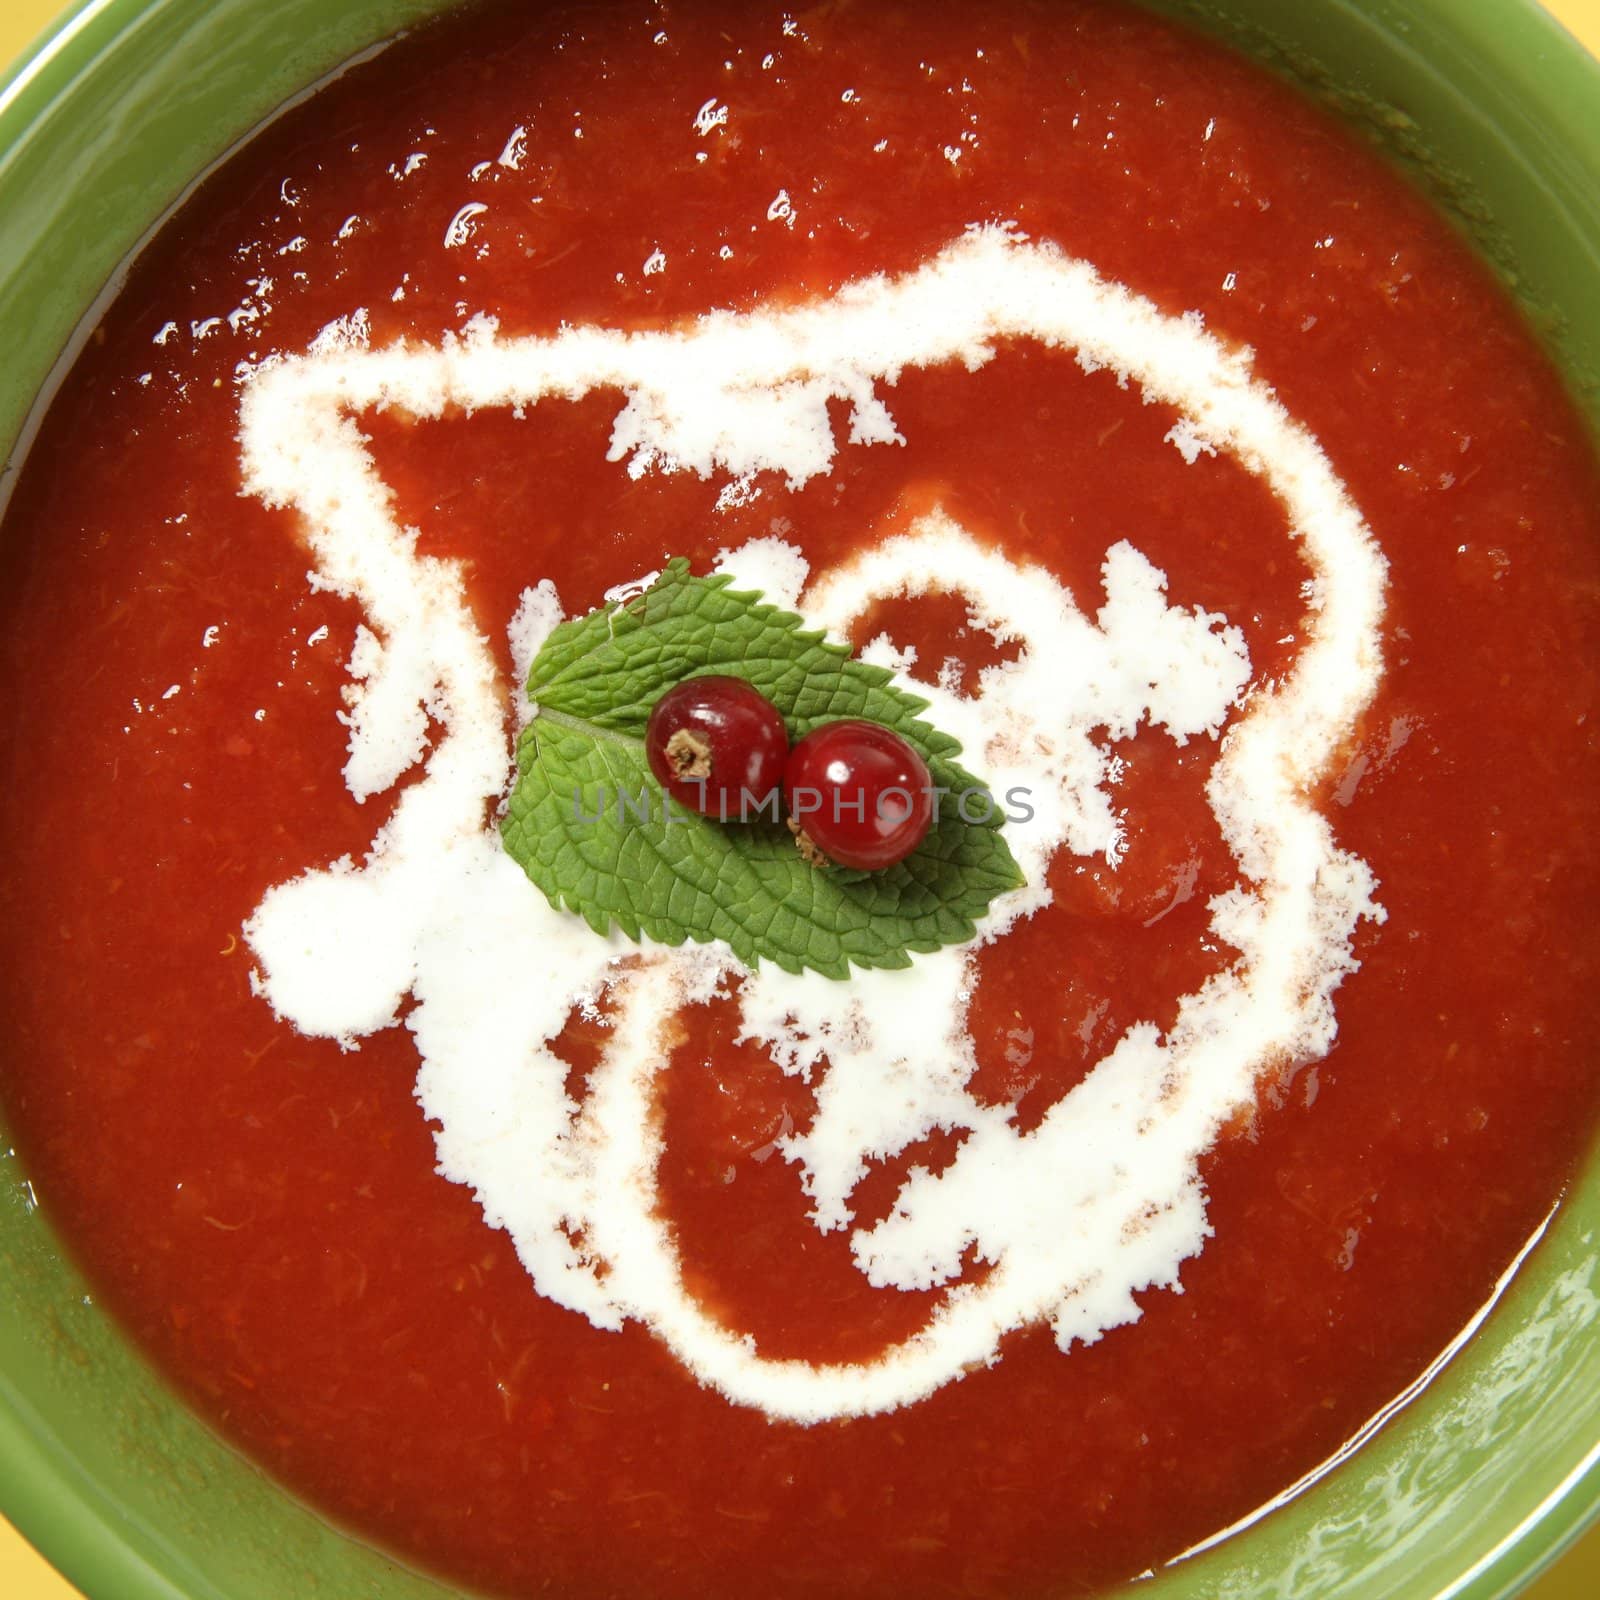 Mediterranean tomato soup with basil and redcurrant in a colorful green dish over wood